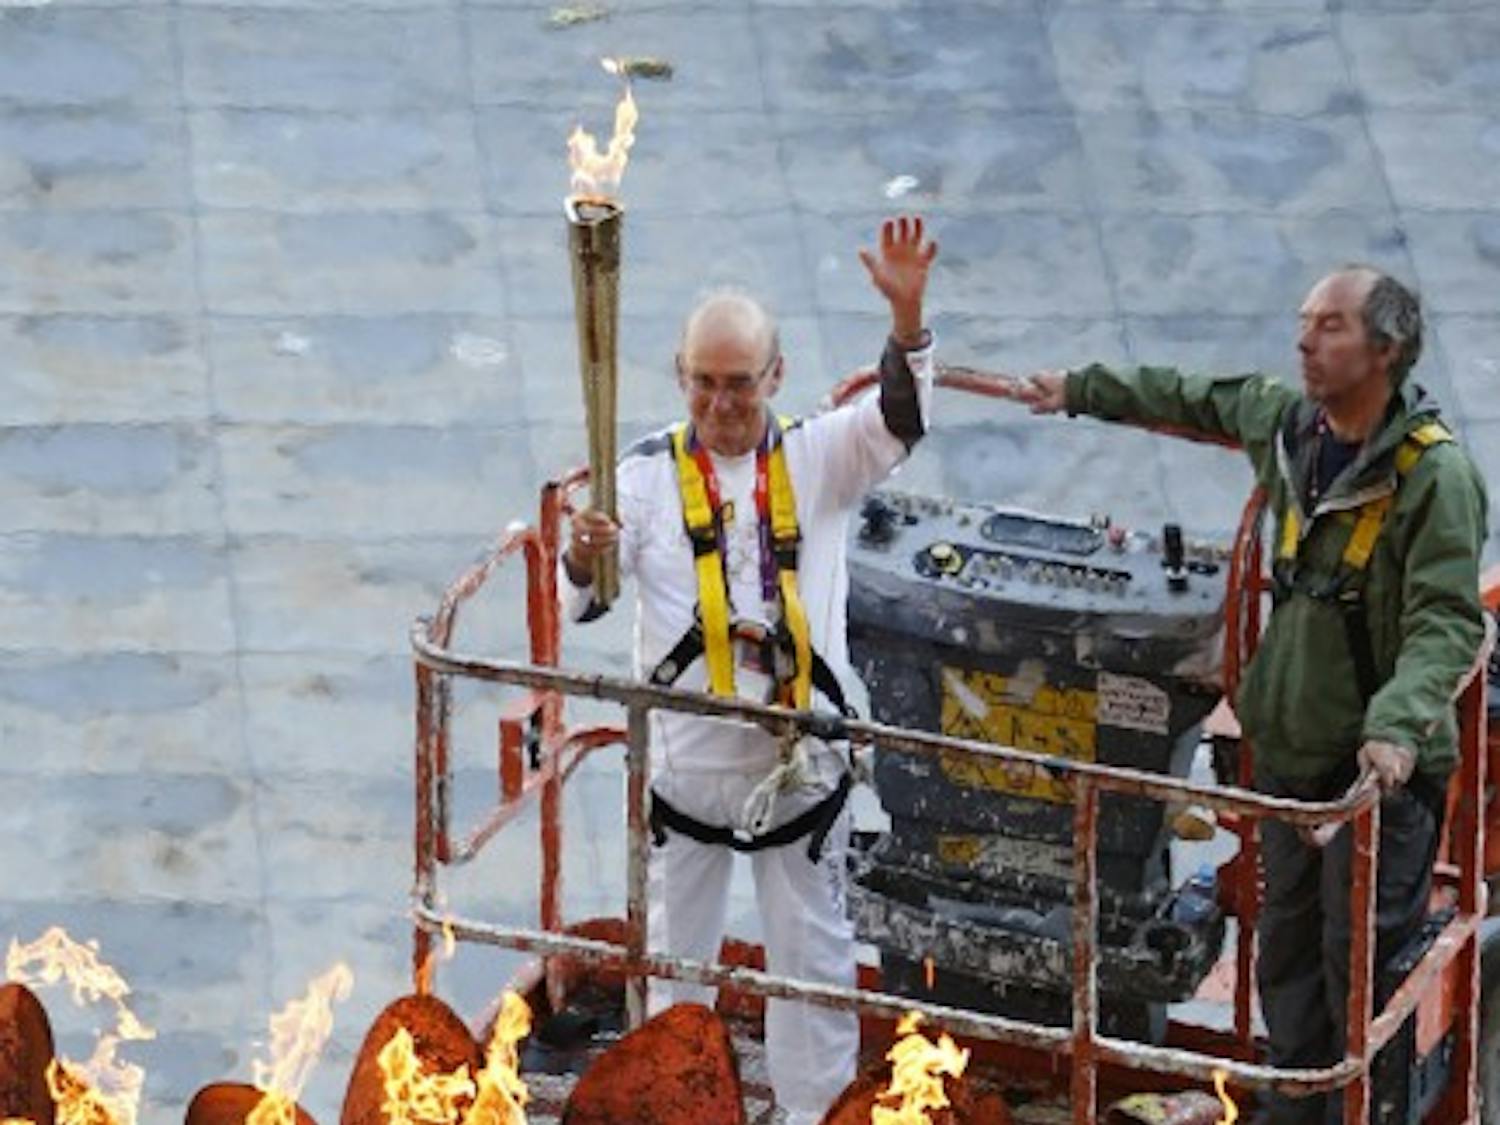 Torchbearer Austin Playfoot, top center, poses after lighting the Olympic cauldron at the Olympic Stadium during the 2012 Summer Olympics, Monday, July 30, 2012, in London. The cauldron was moved from the infield to its resting position at the stadium. (AP Photo/Jae C. Hong)